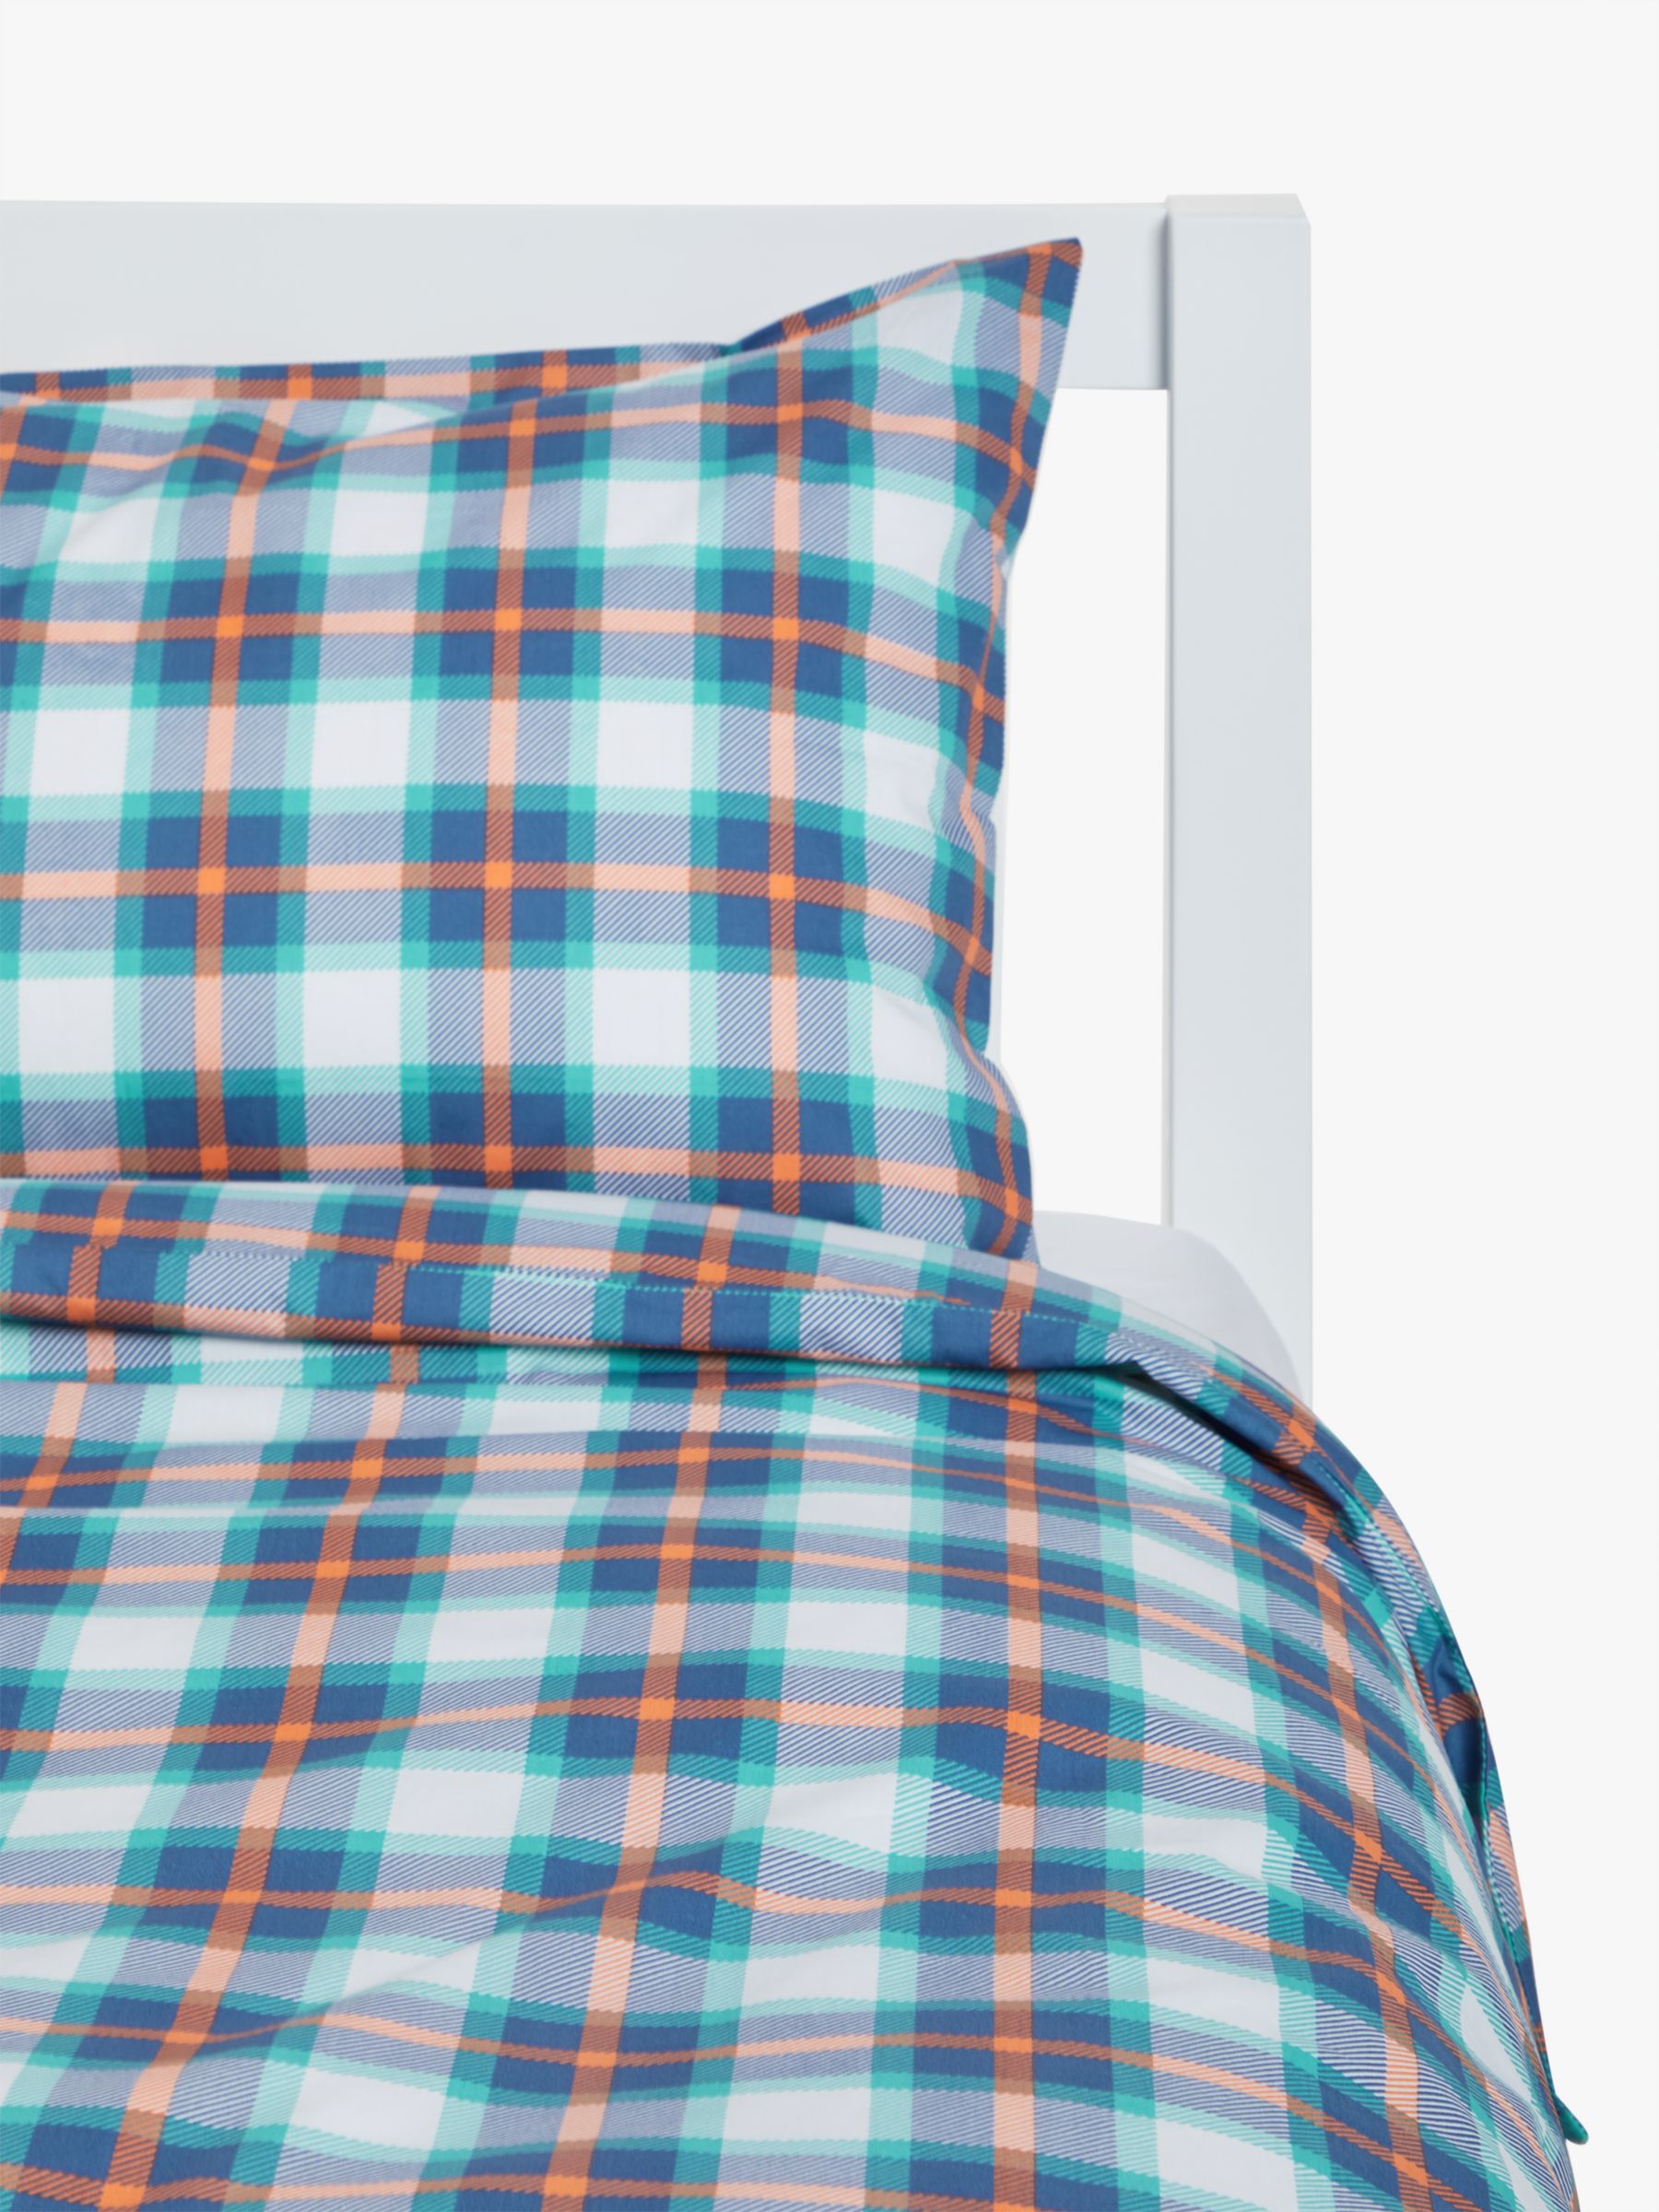 Little Home At John Lewis Check Duvet Cover And Pillowcase Set